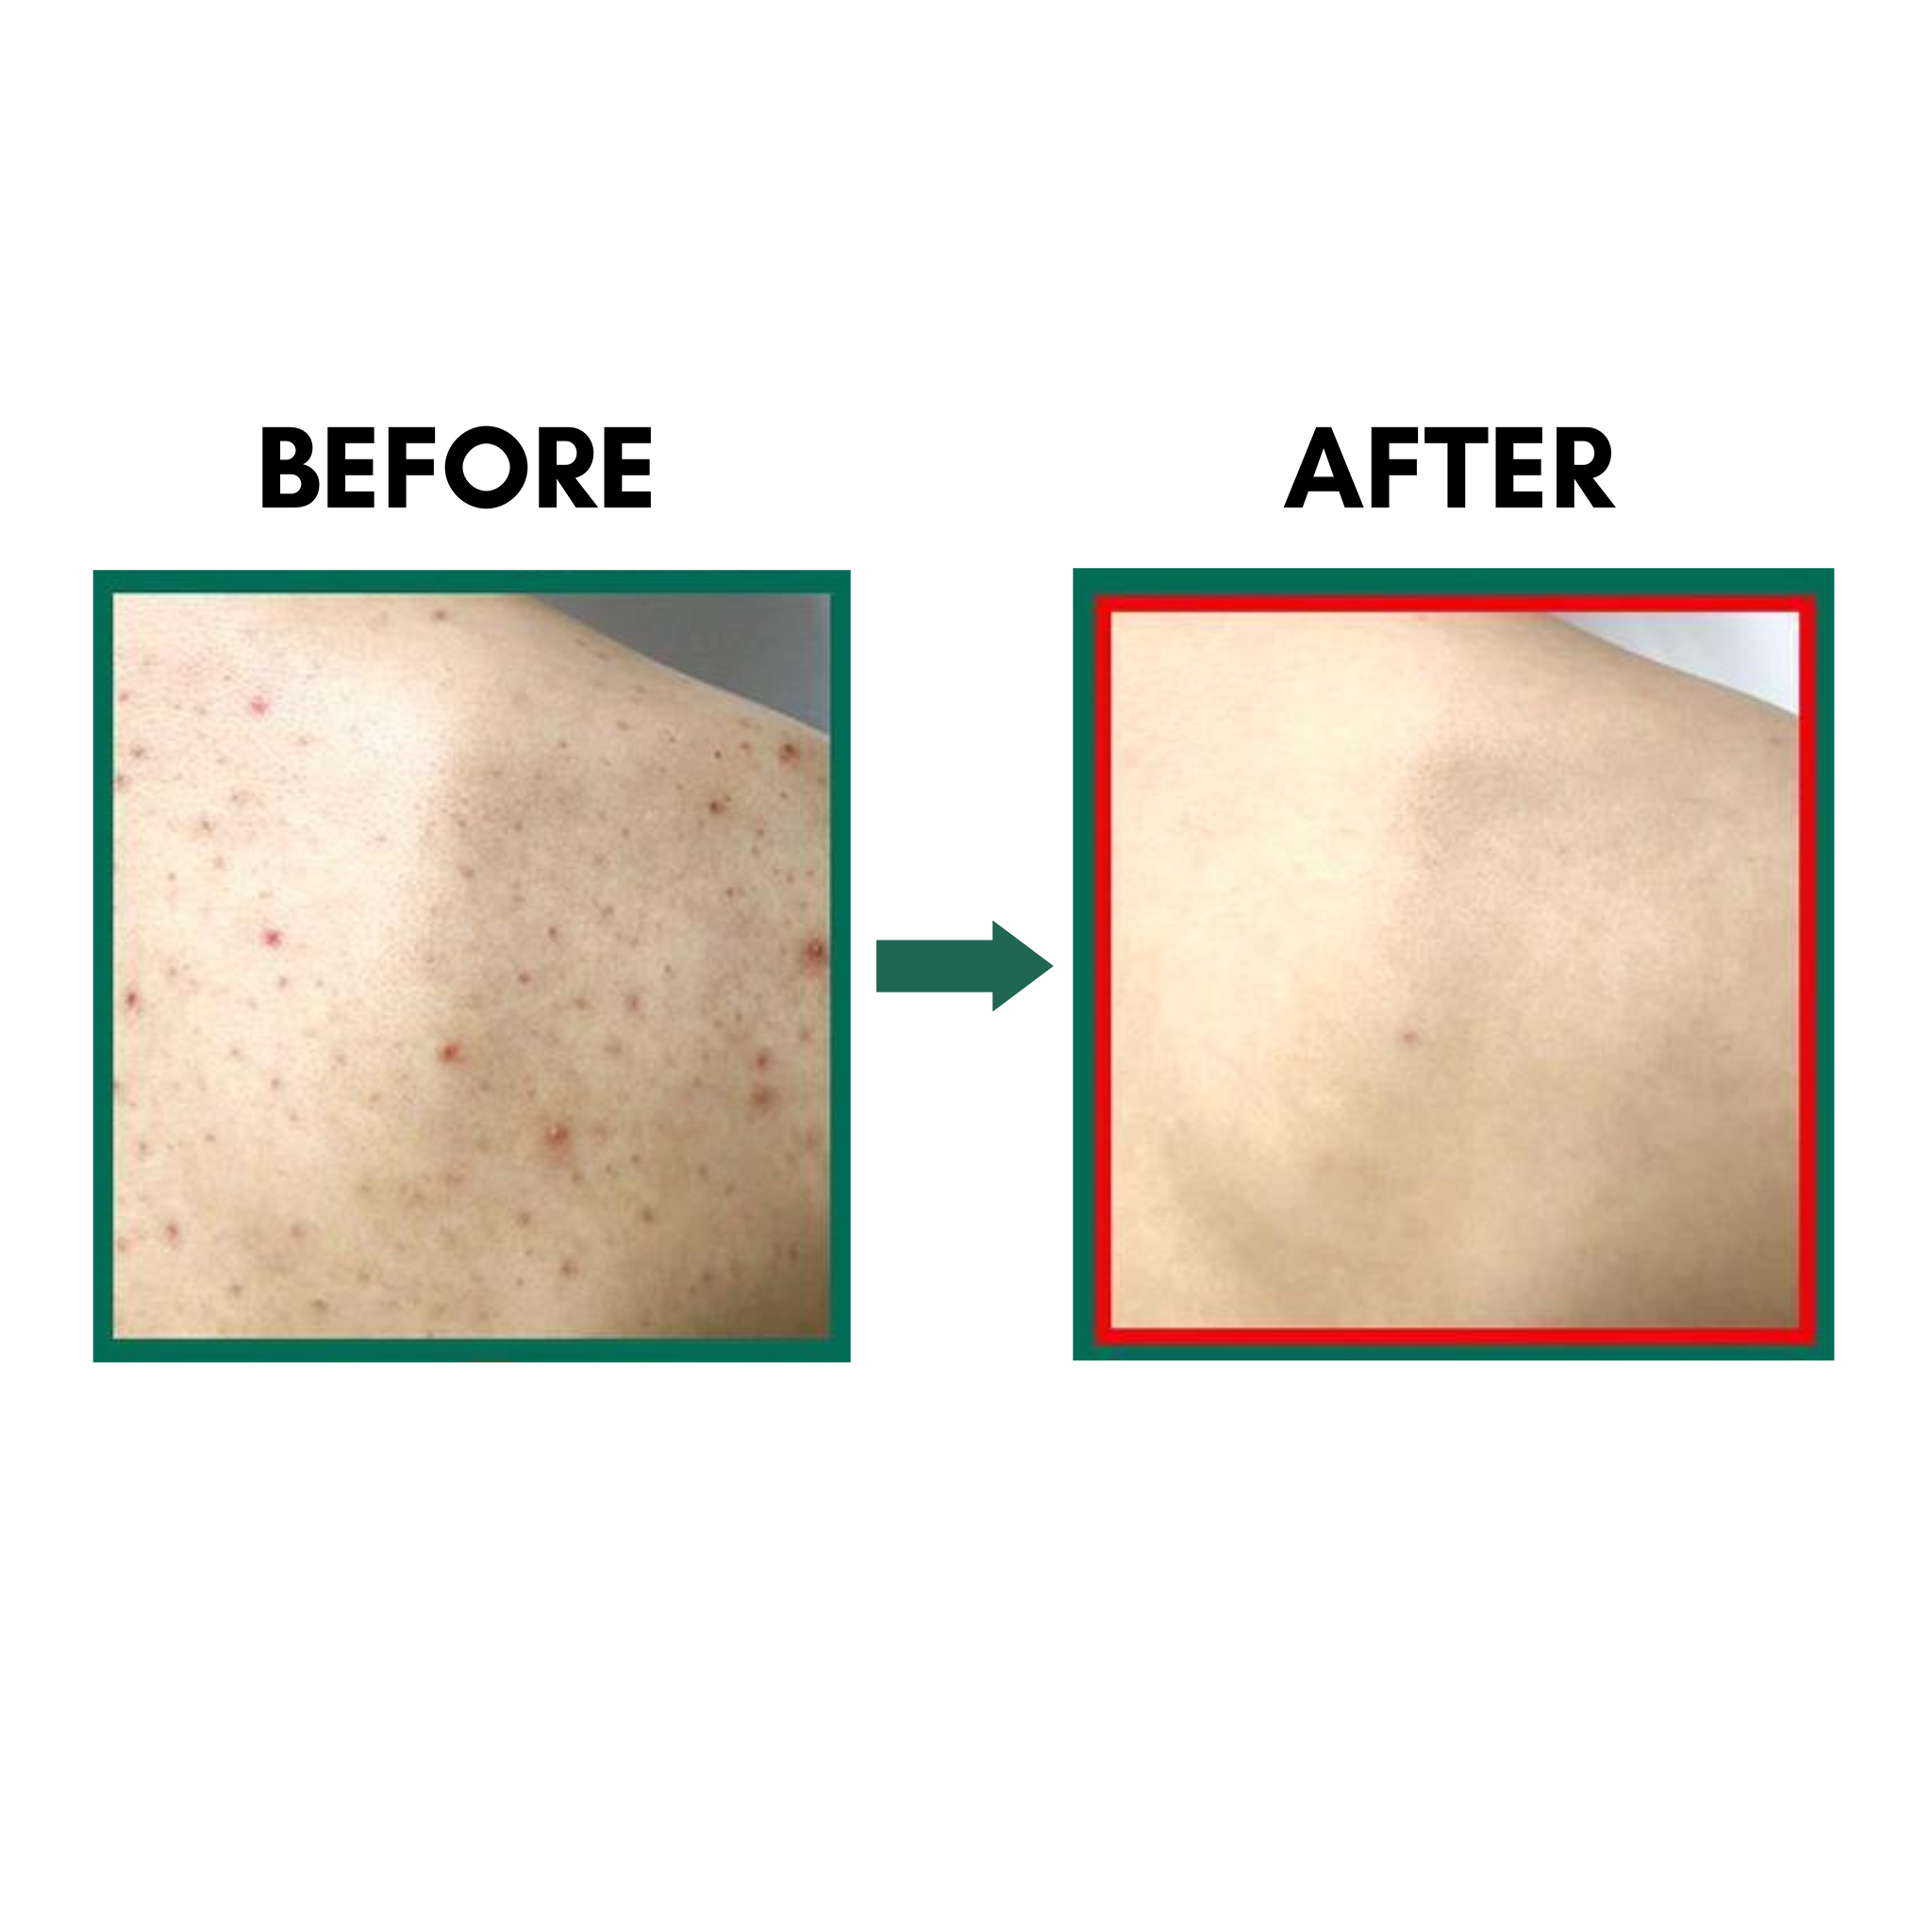 SOME BY MI AHA BHA PHA 30 Days Miracle Clear Body Cleanser (400ml) Results before and after